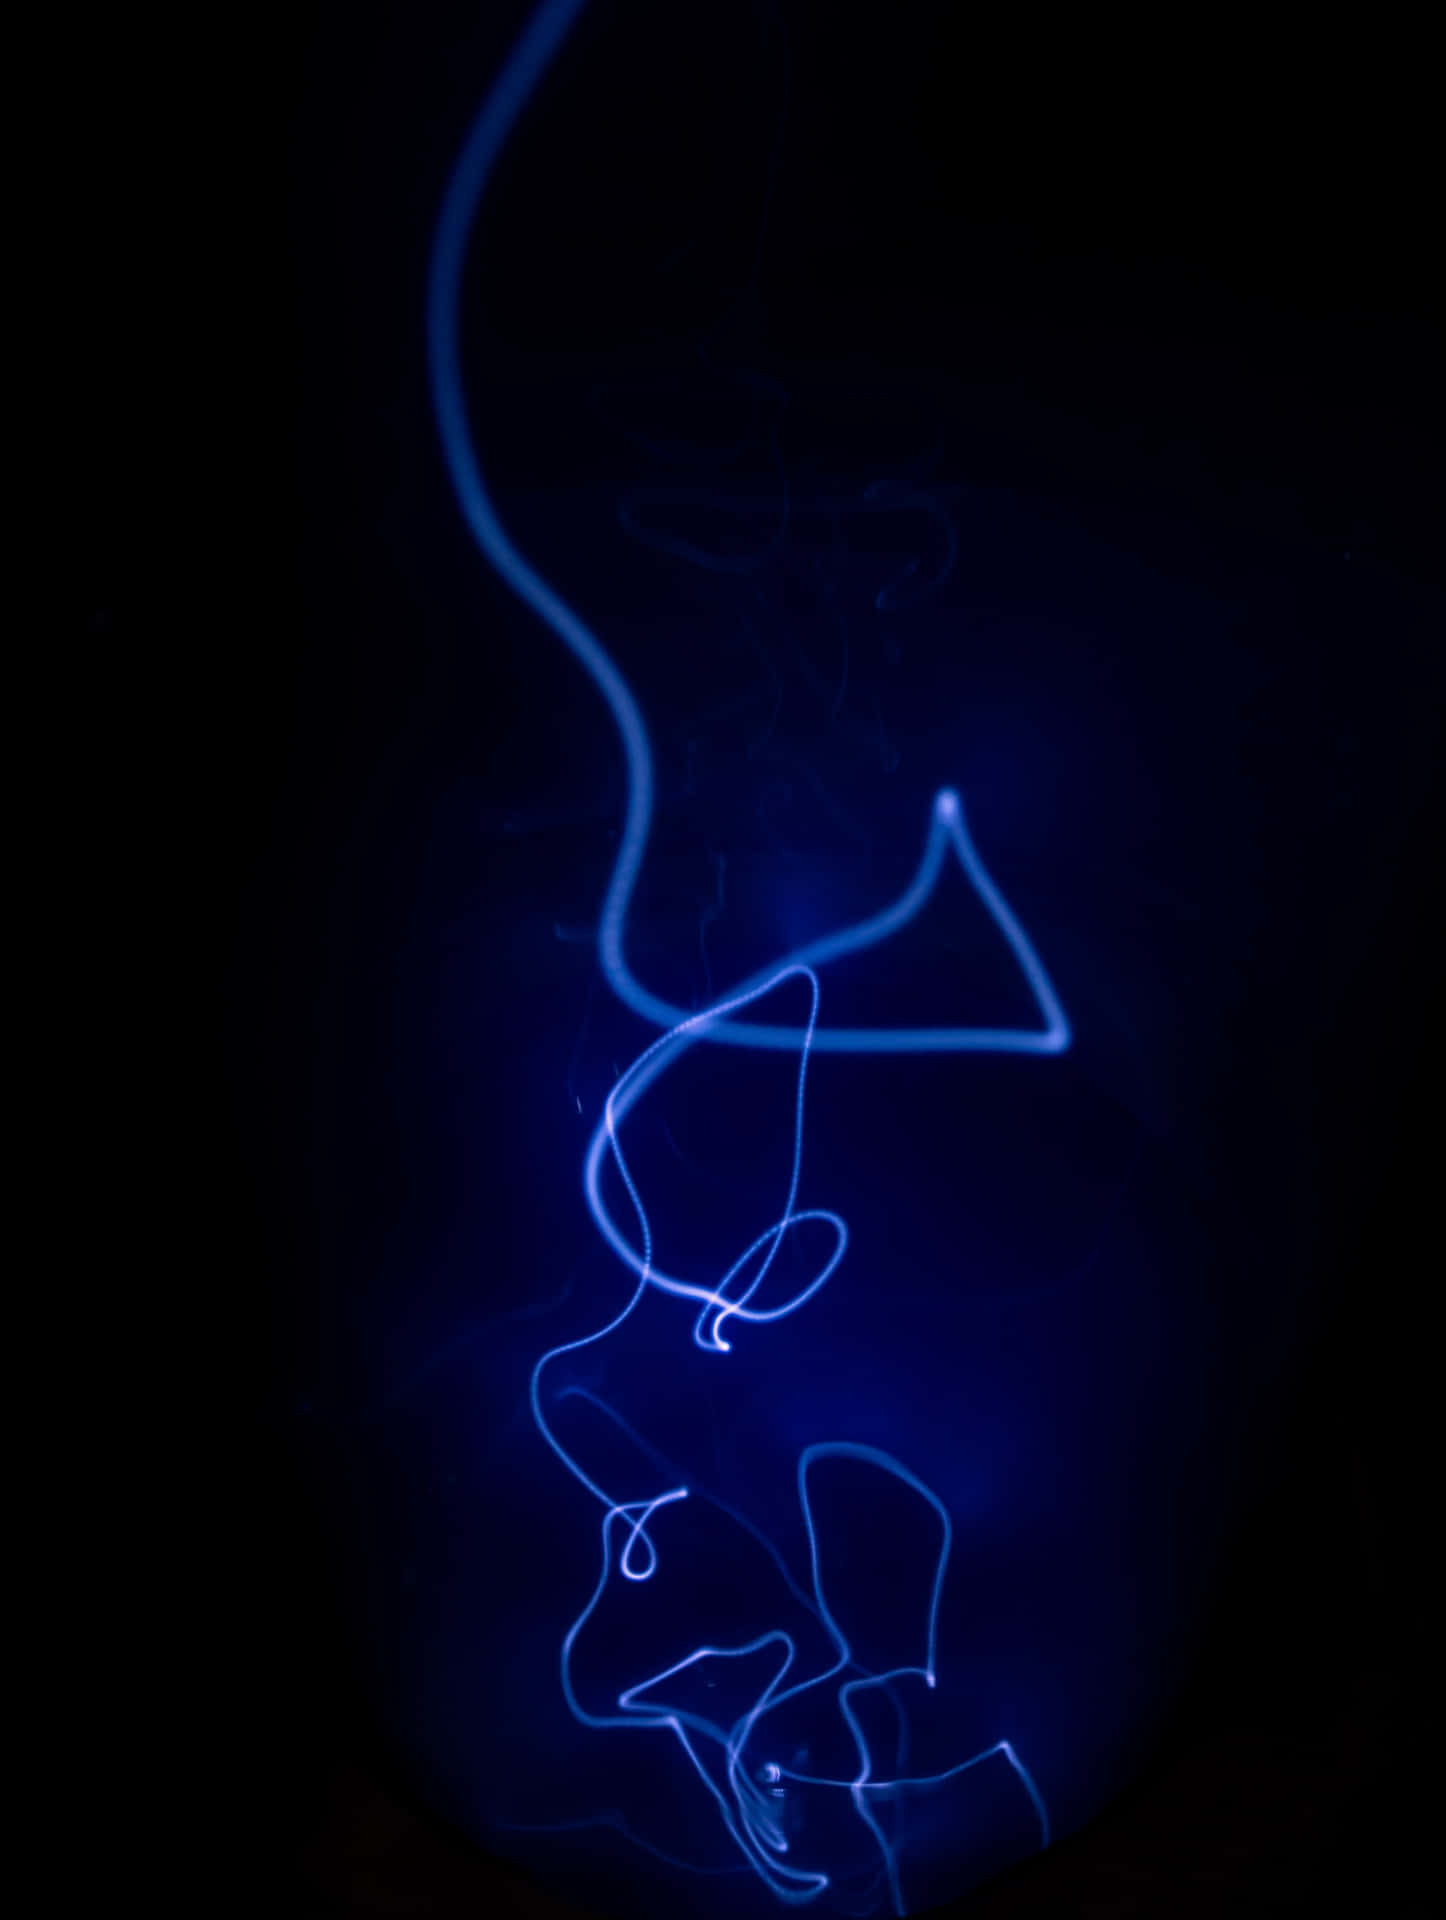 A Blue Light Drawing Of A Dog In A Dark Room